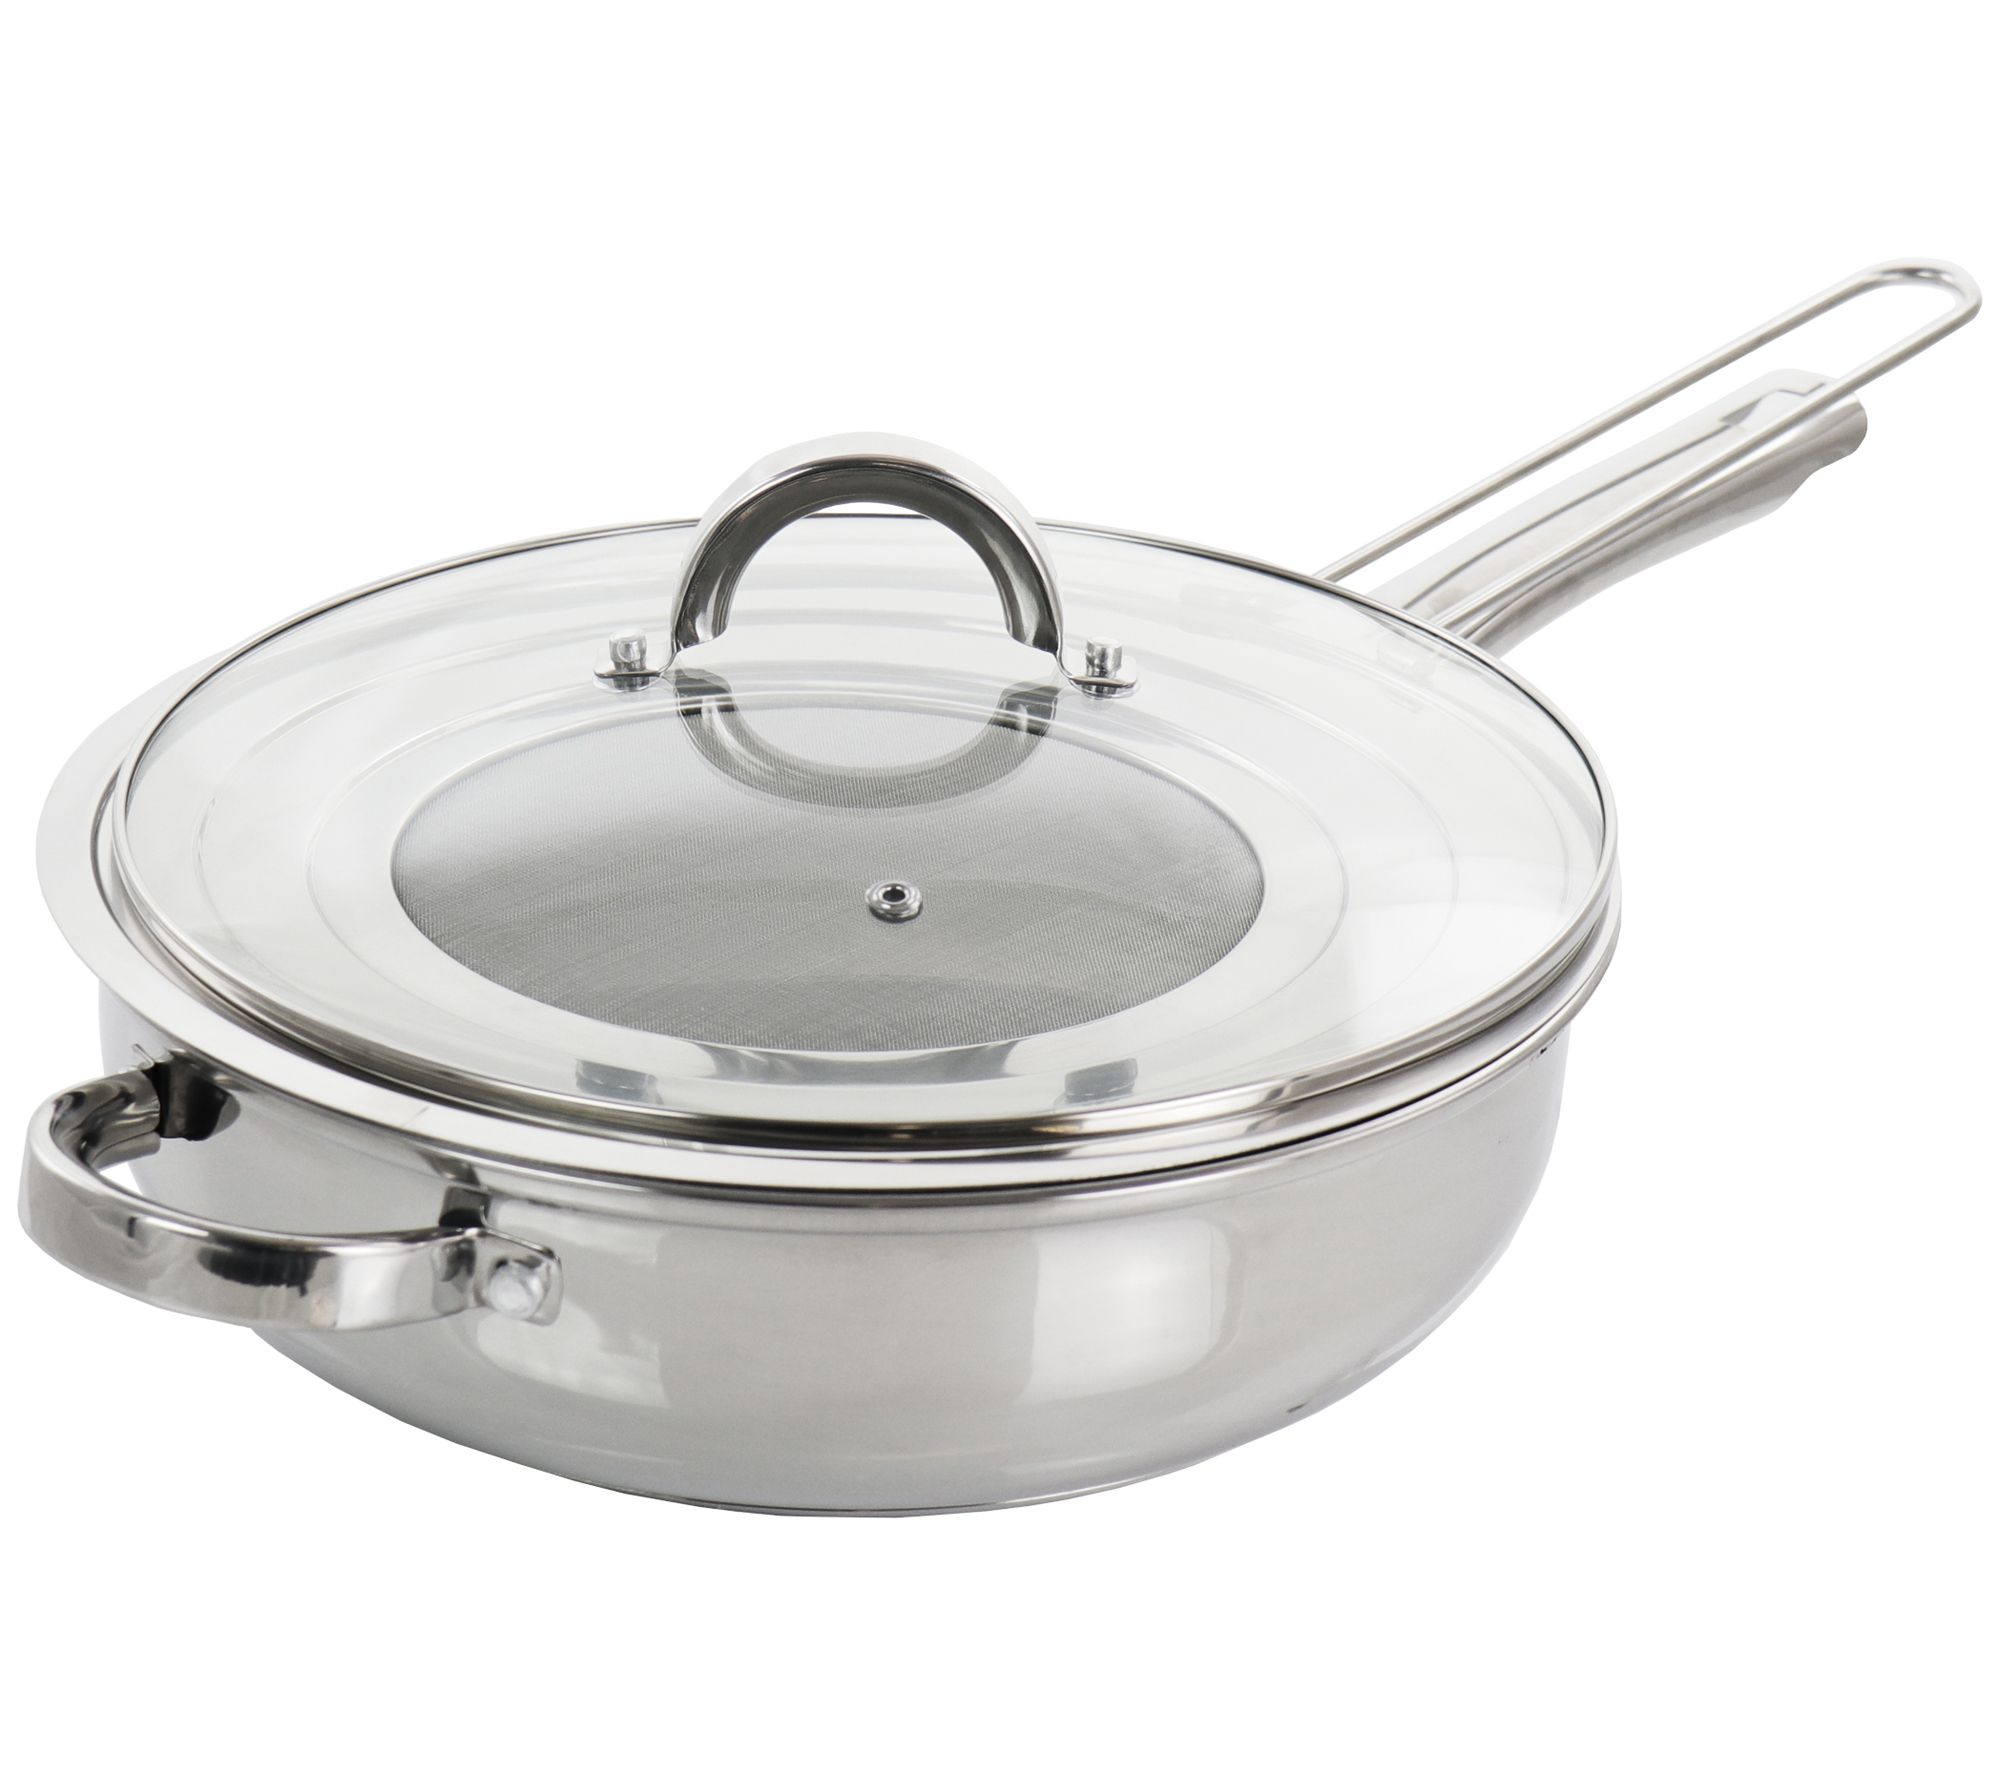 Oster Sangerfield 4 Quart Stainless Steel Dutch Oven with Lid and